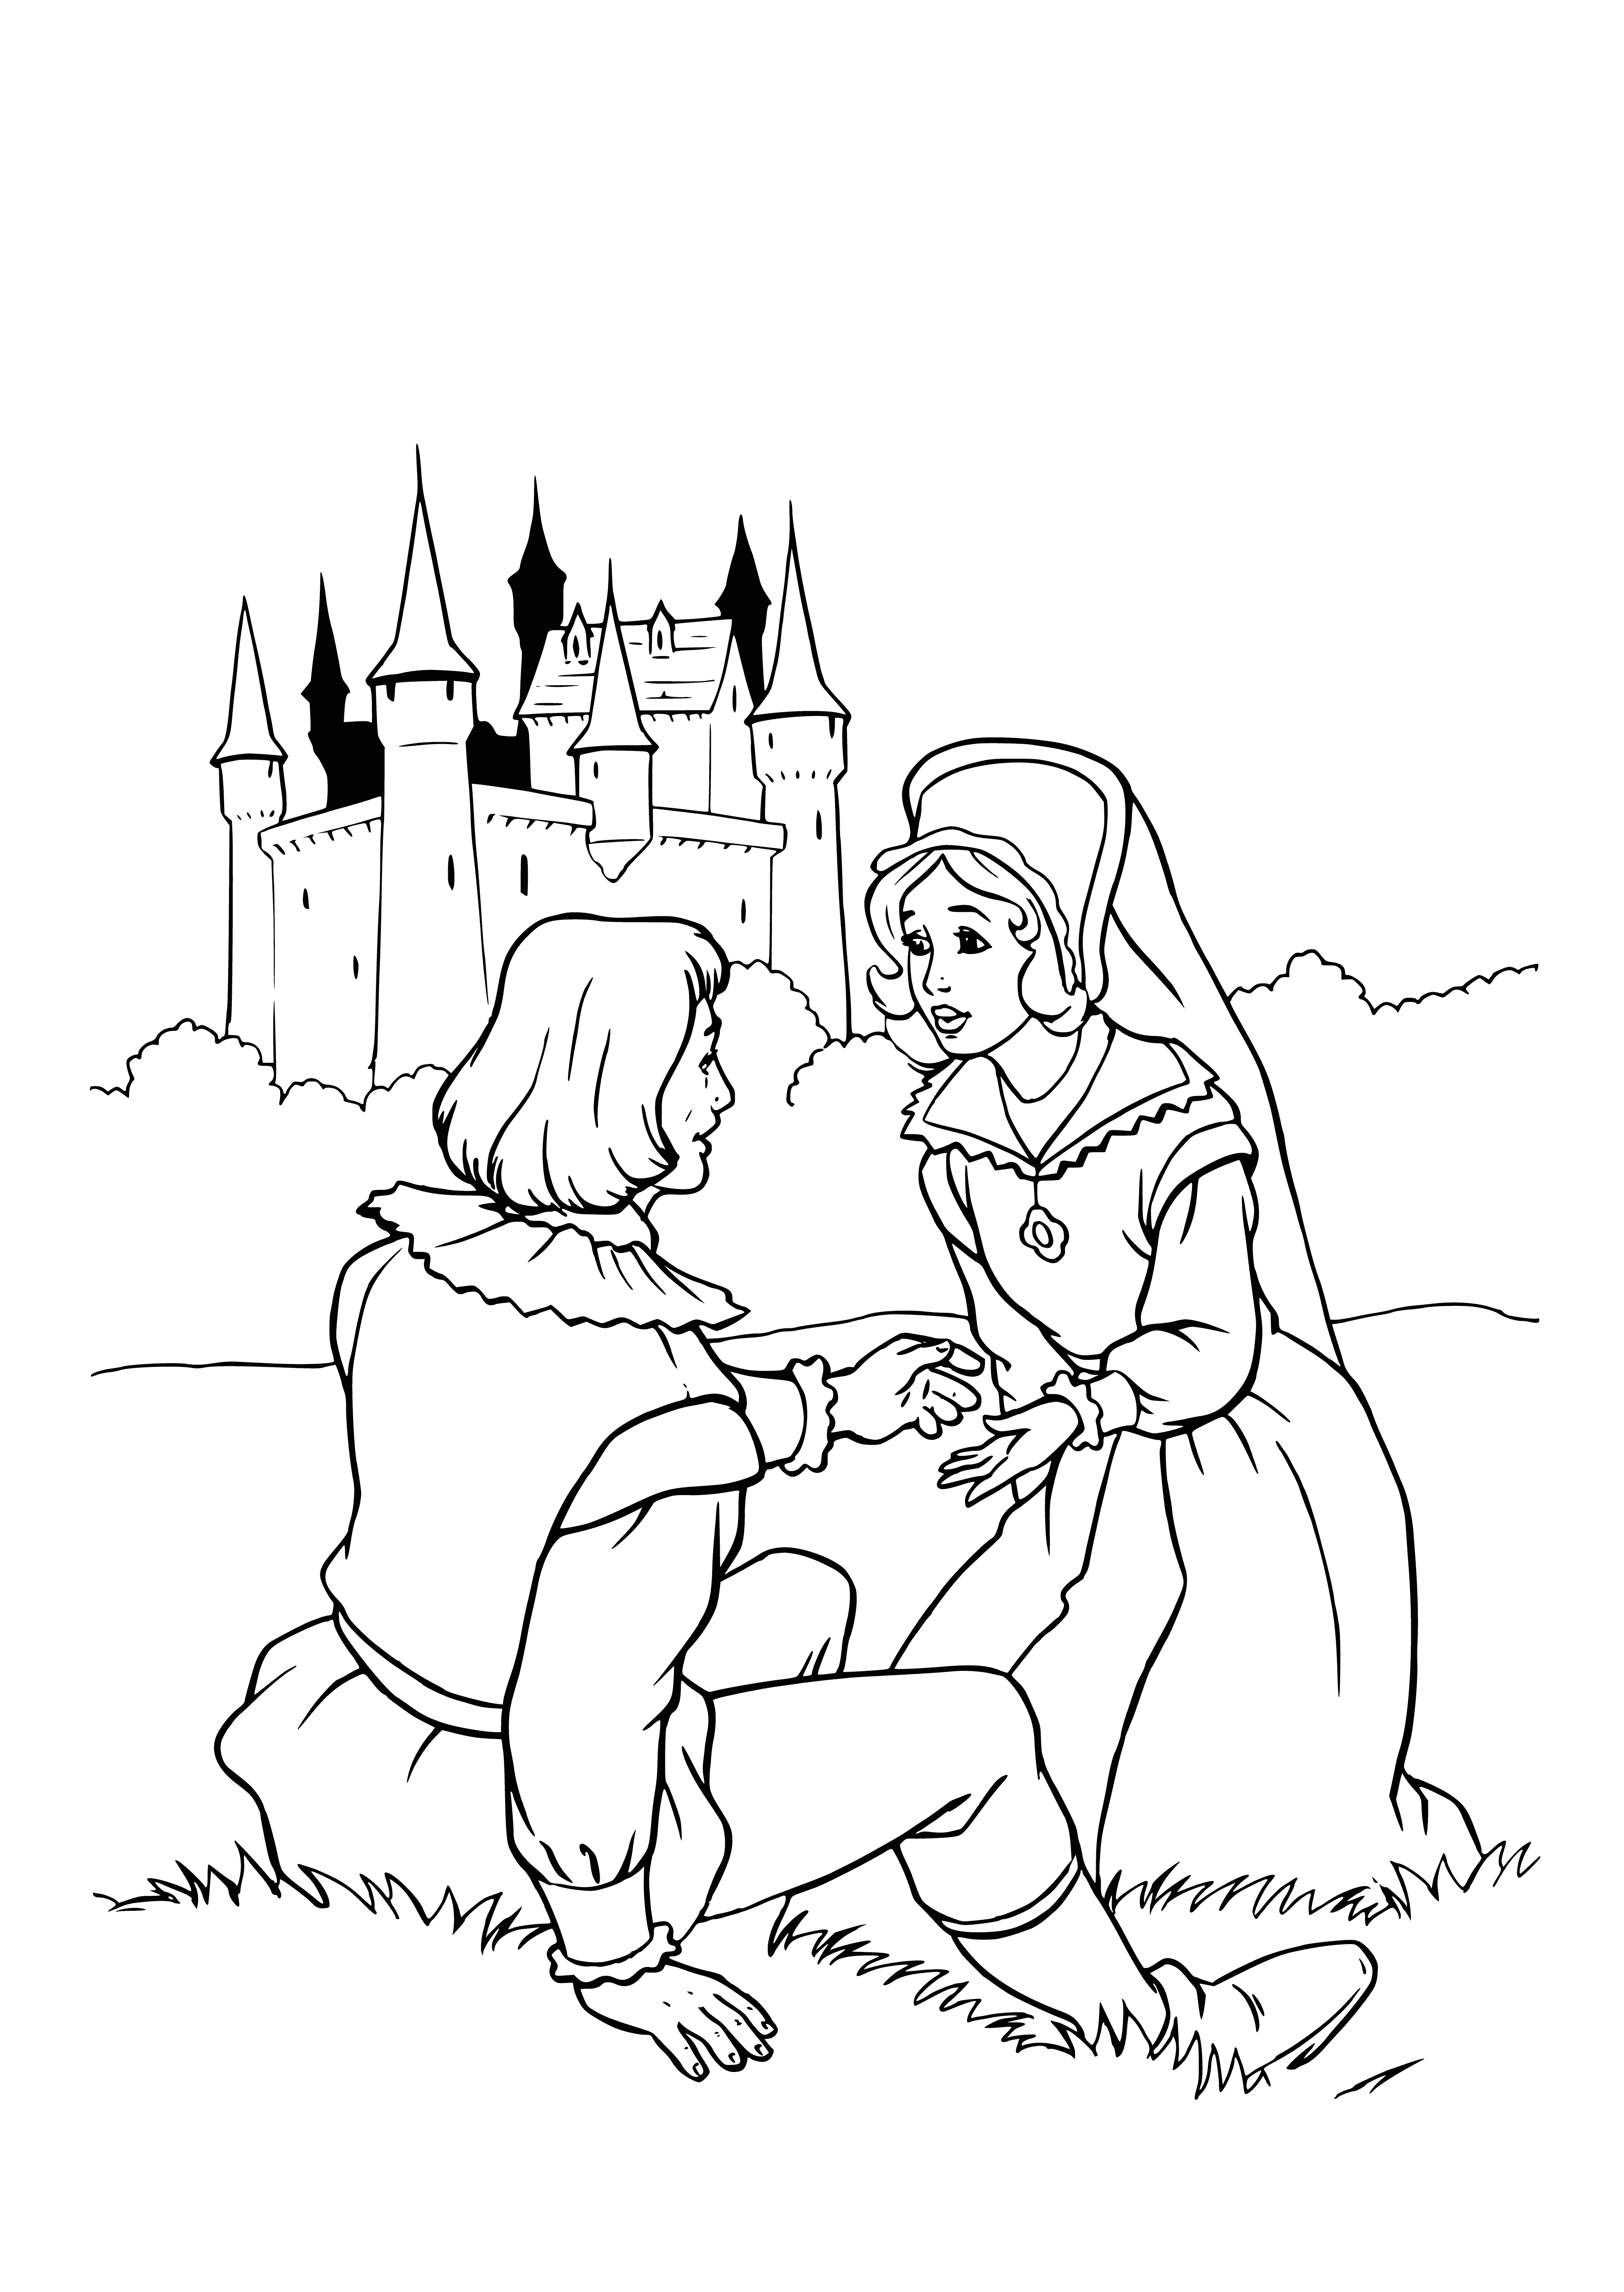 coloring page: Woman in white dress sadly looks at palace while lion-man creature looks at her gently. In ethereal scene, moat surrounds palace with many windows & towers.